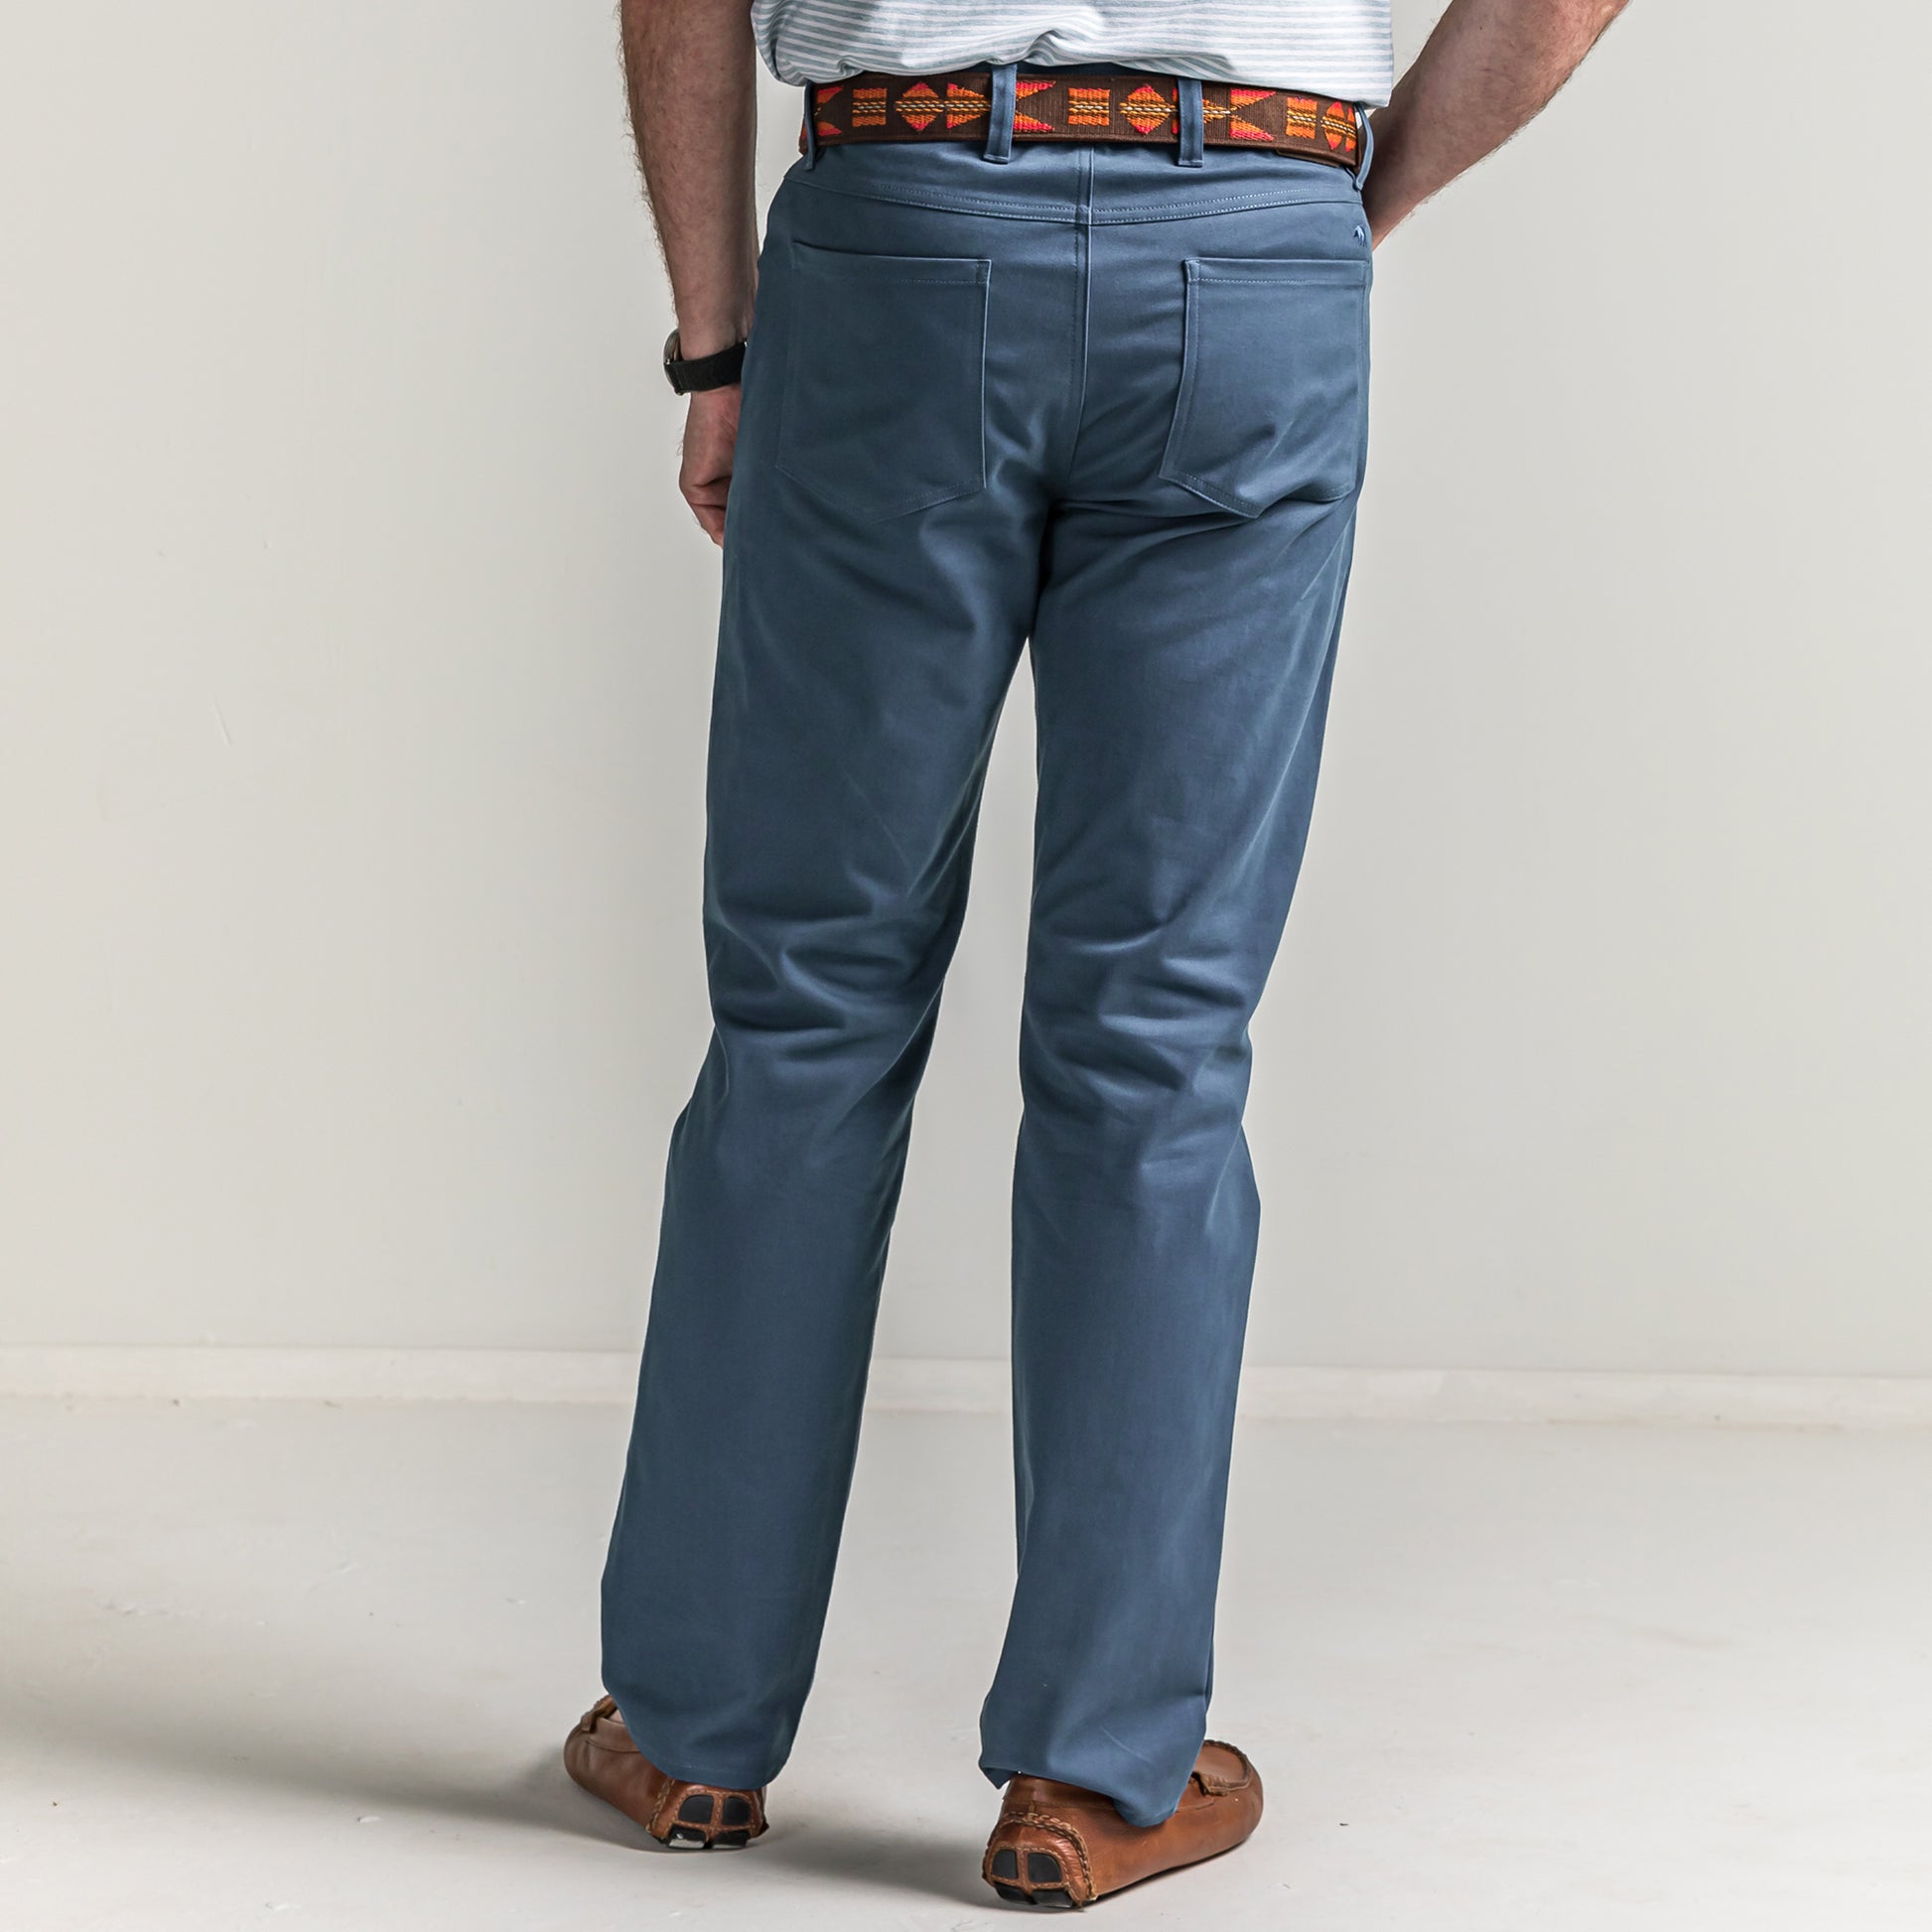 Five-Pocket Pants With Custom Detail On The Back